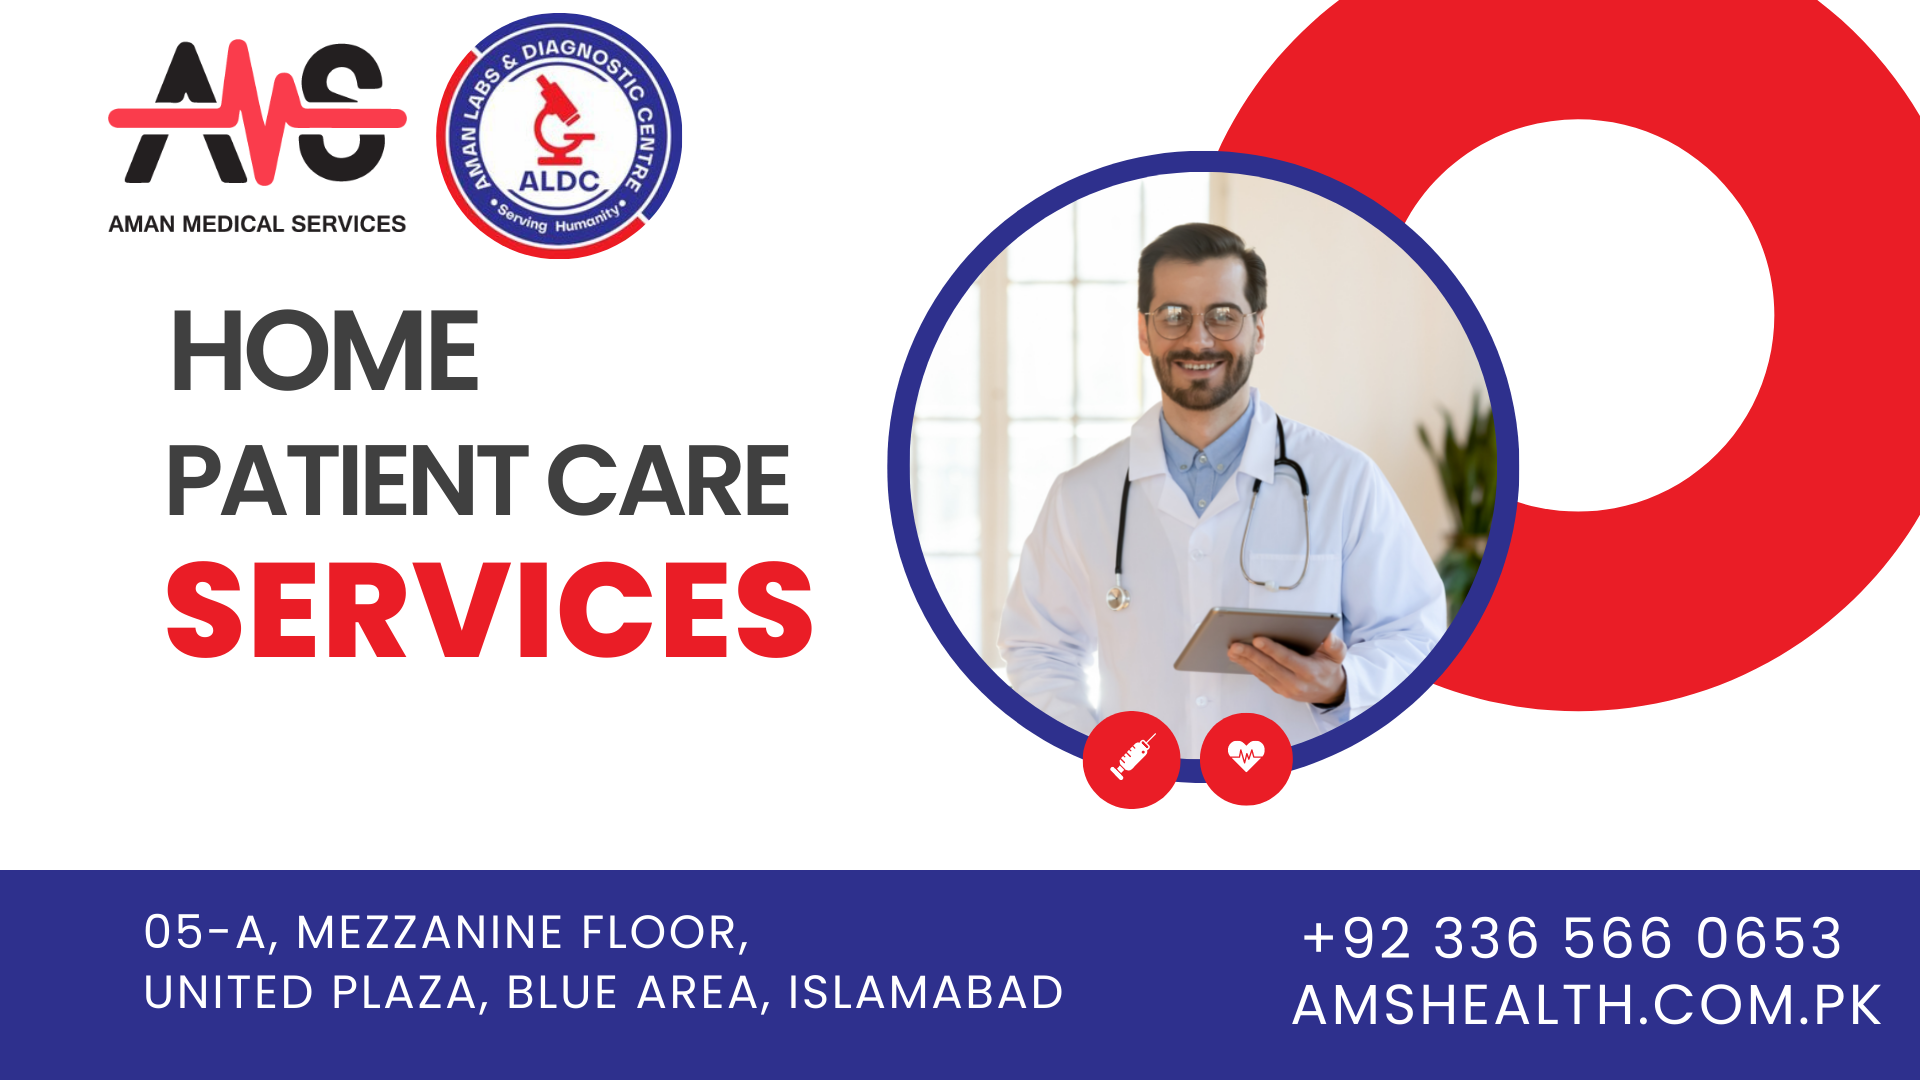 Home Nursing Services in Islamabad – Aman Medical